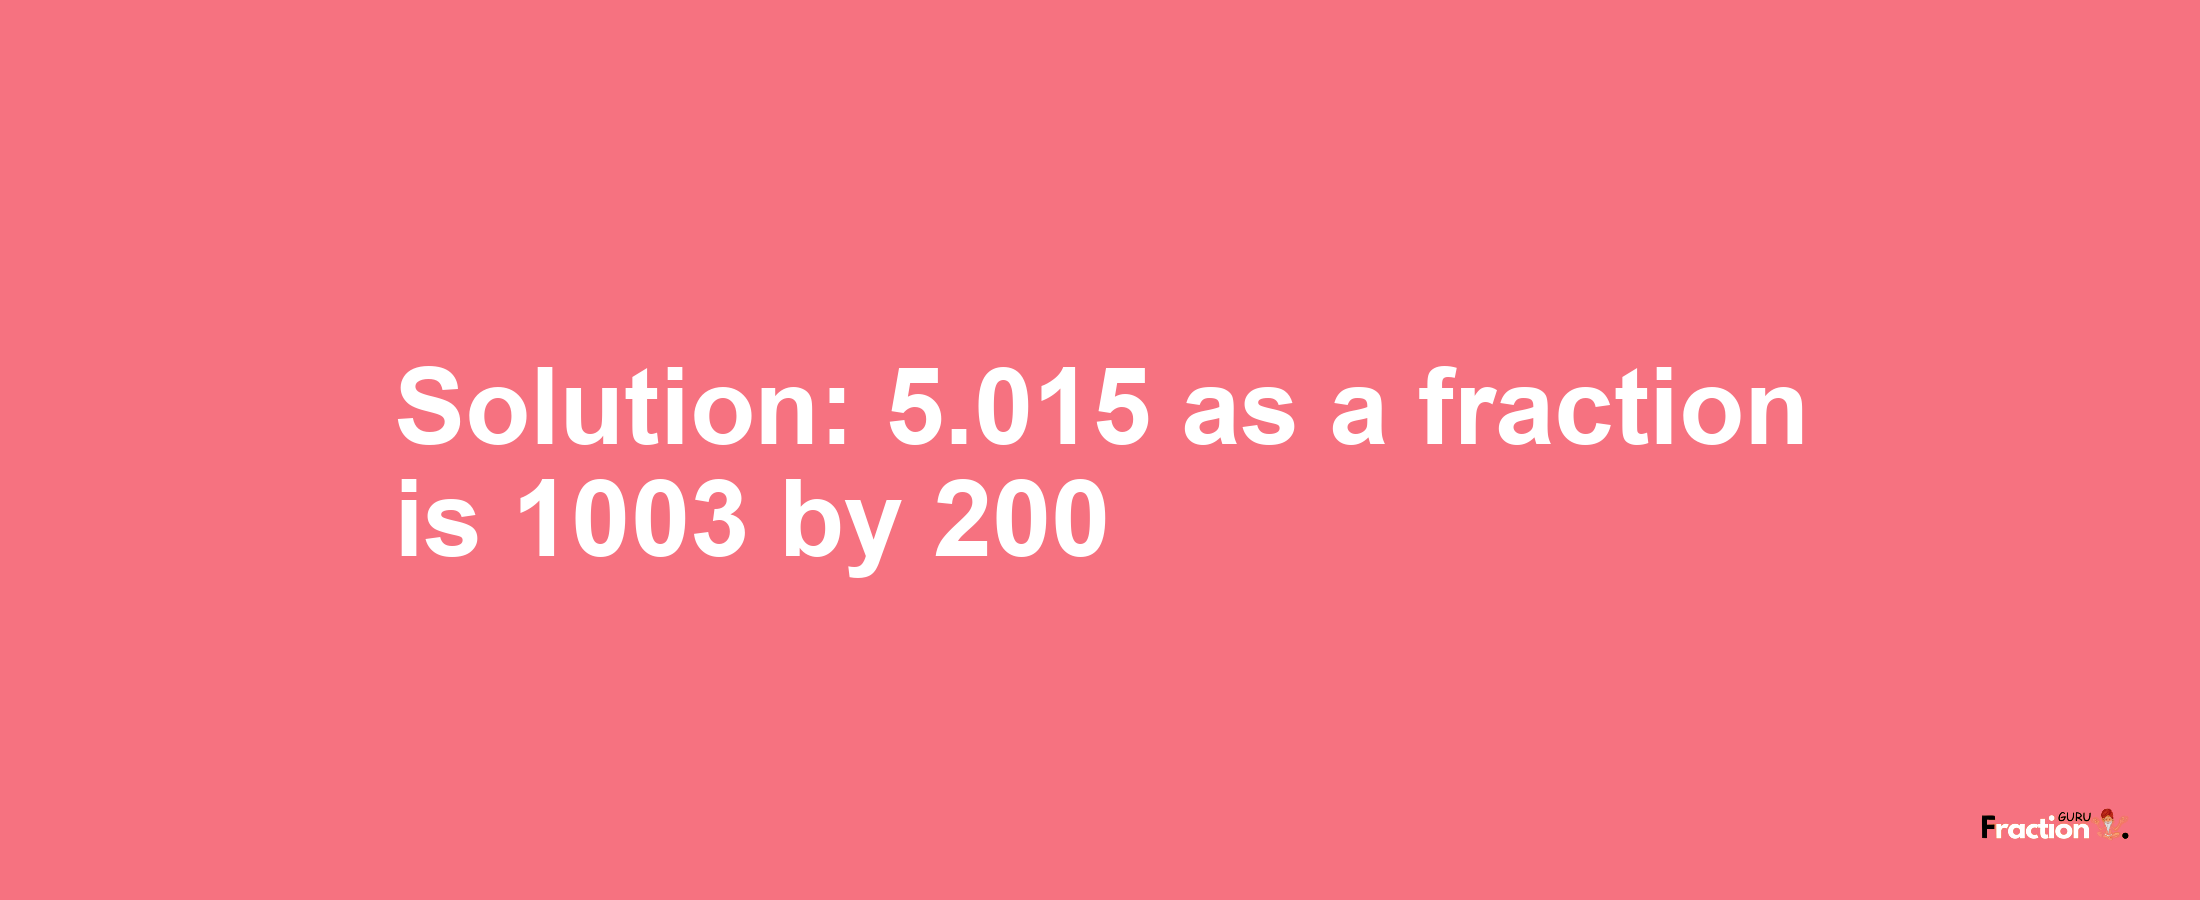 Solution:5.015 as a fraction is 1003/200